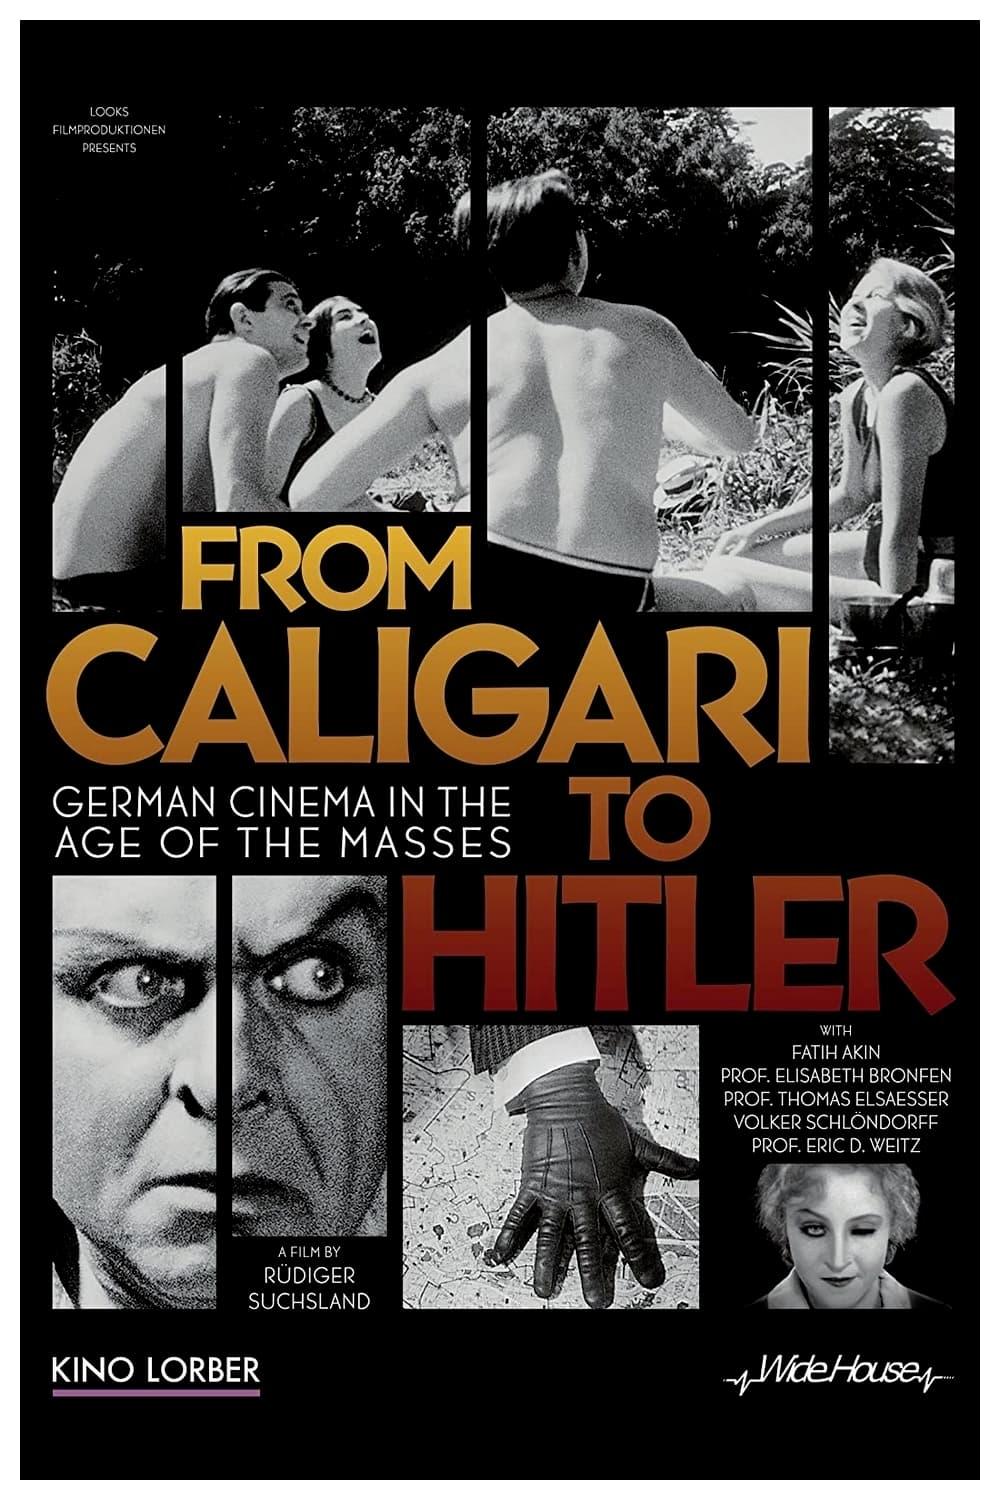 From Caligari to Hitler poster